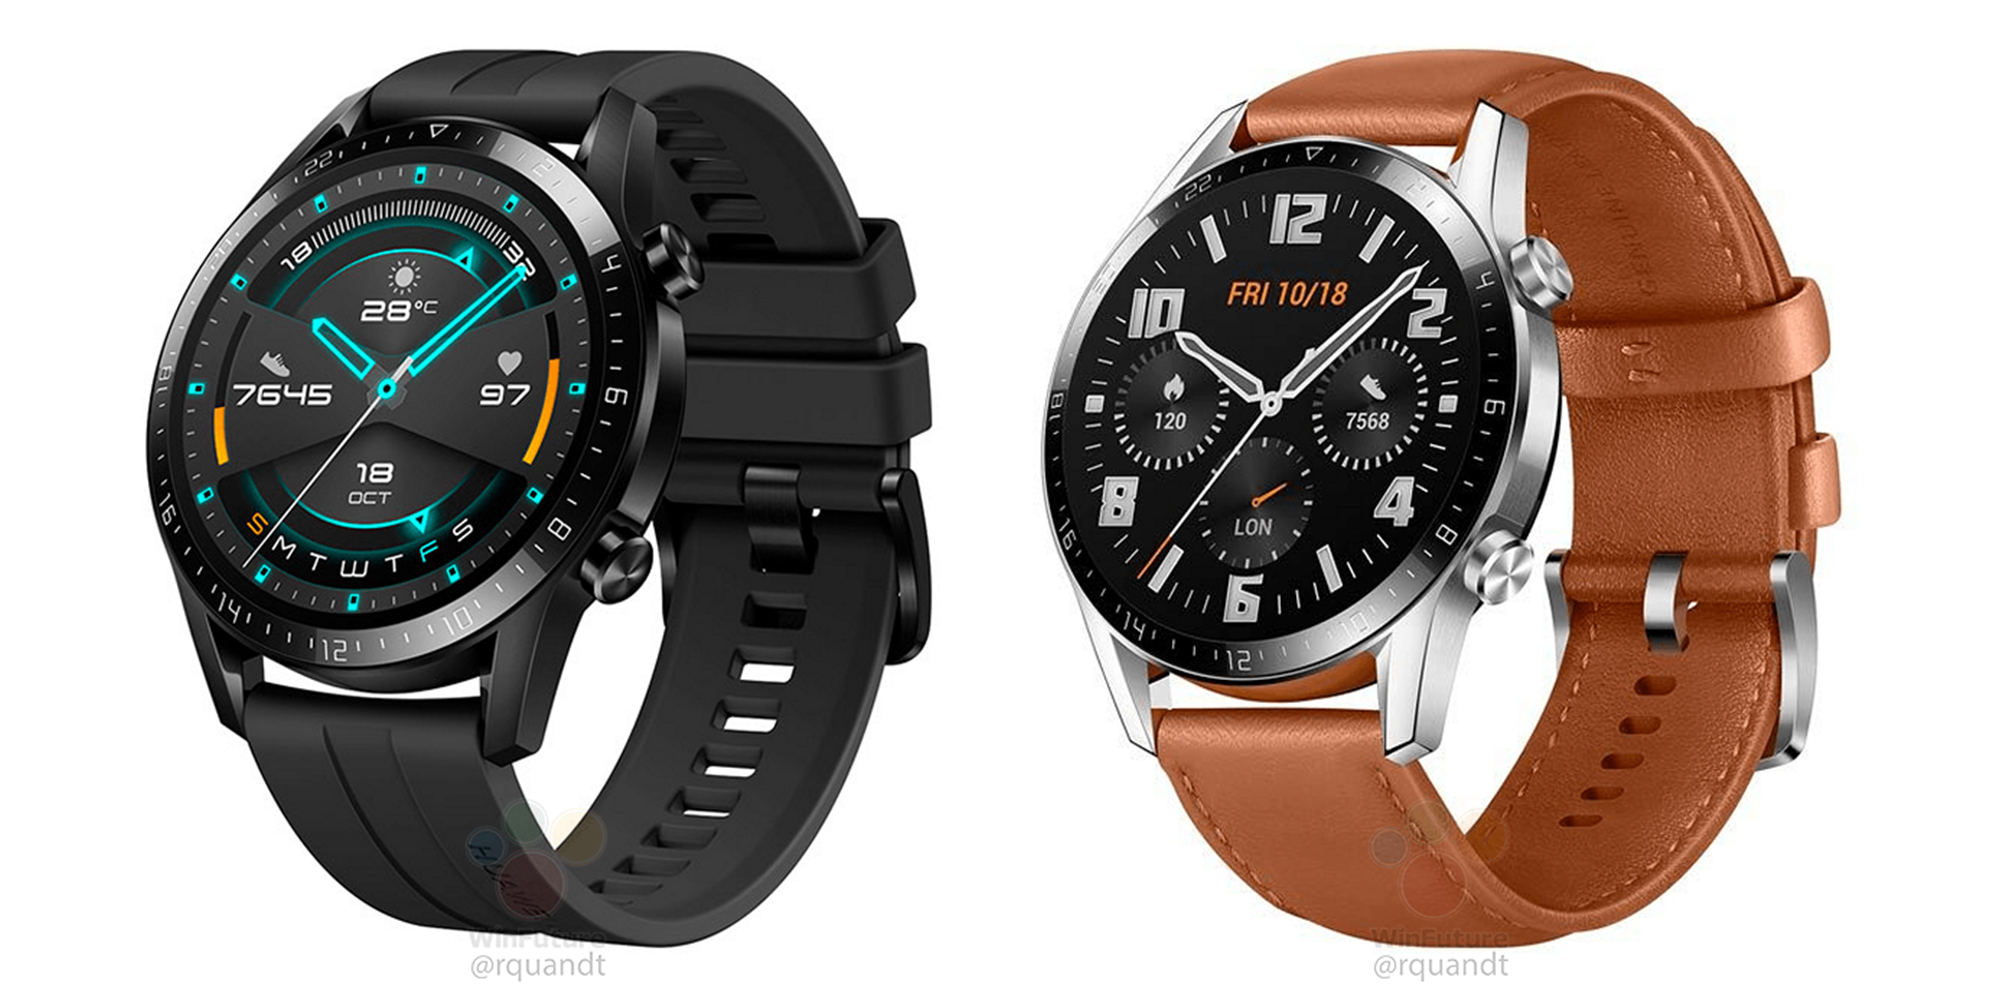 Huawei Watch GT 2 leaks in press images w/ design refresh - 9to5Google